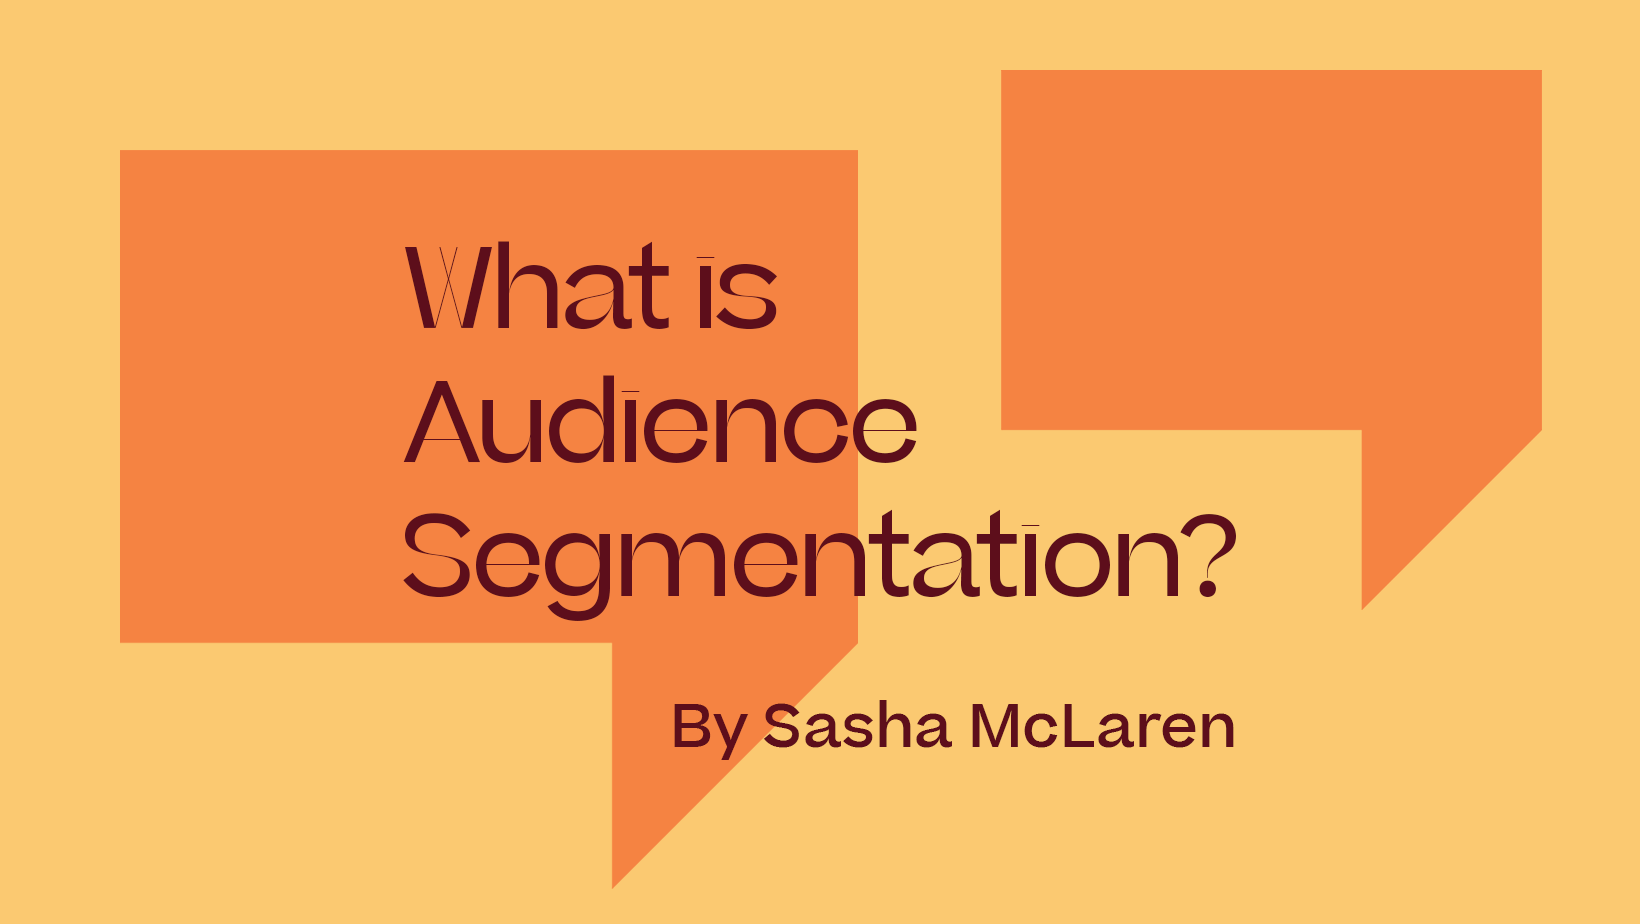 What is Audience Segmentation? By Sasha McLaren on yellow and orange background with speech bubbles